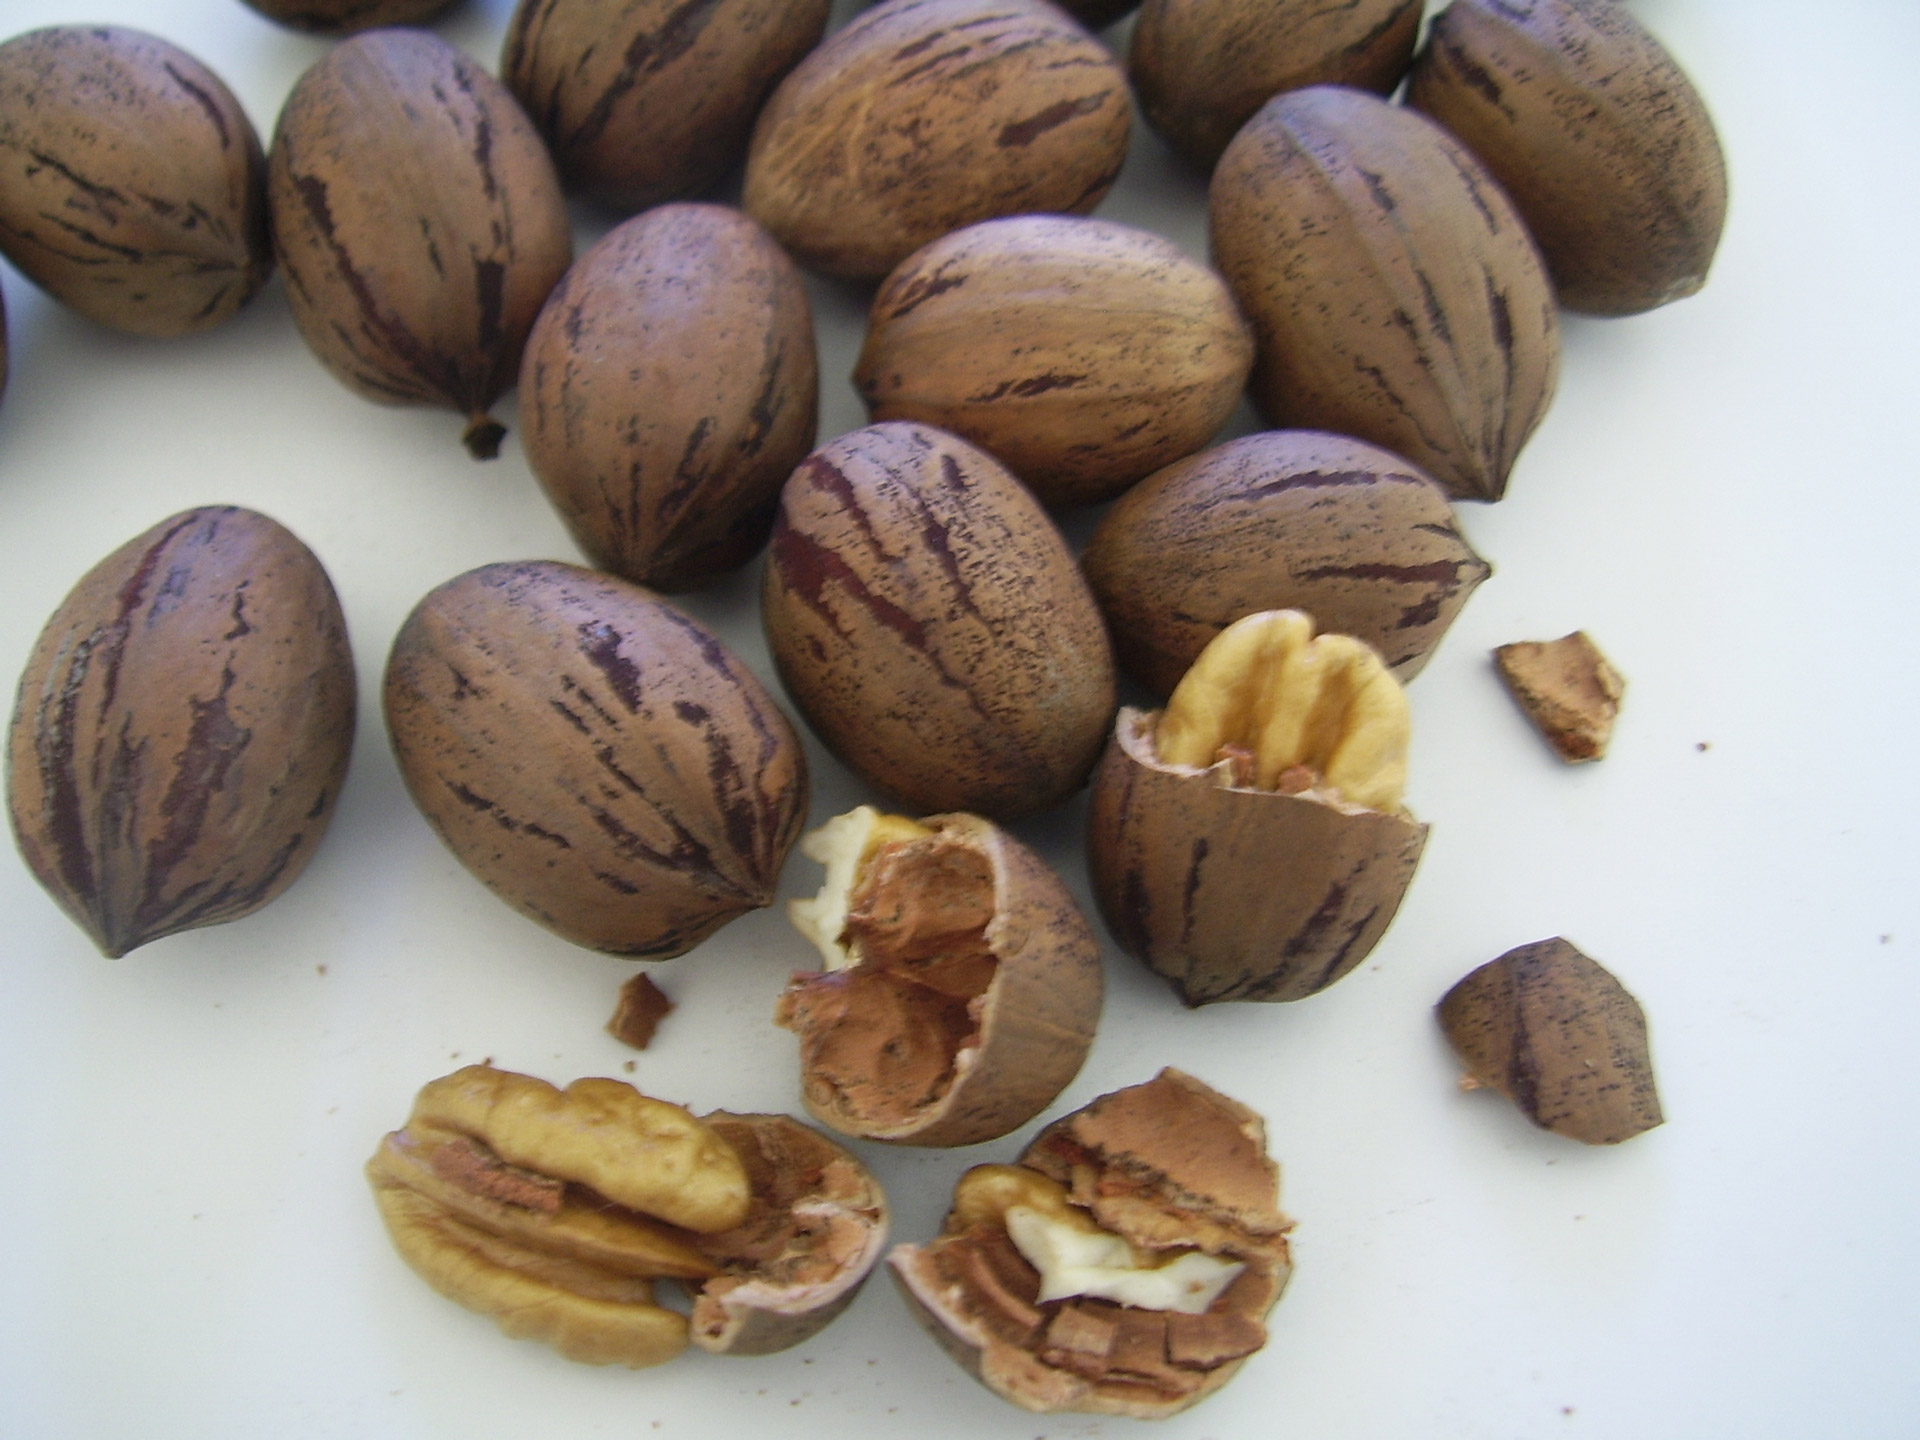 Shelled pecan nuts